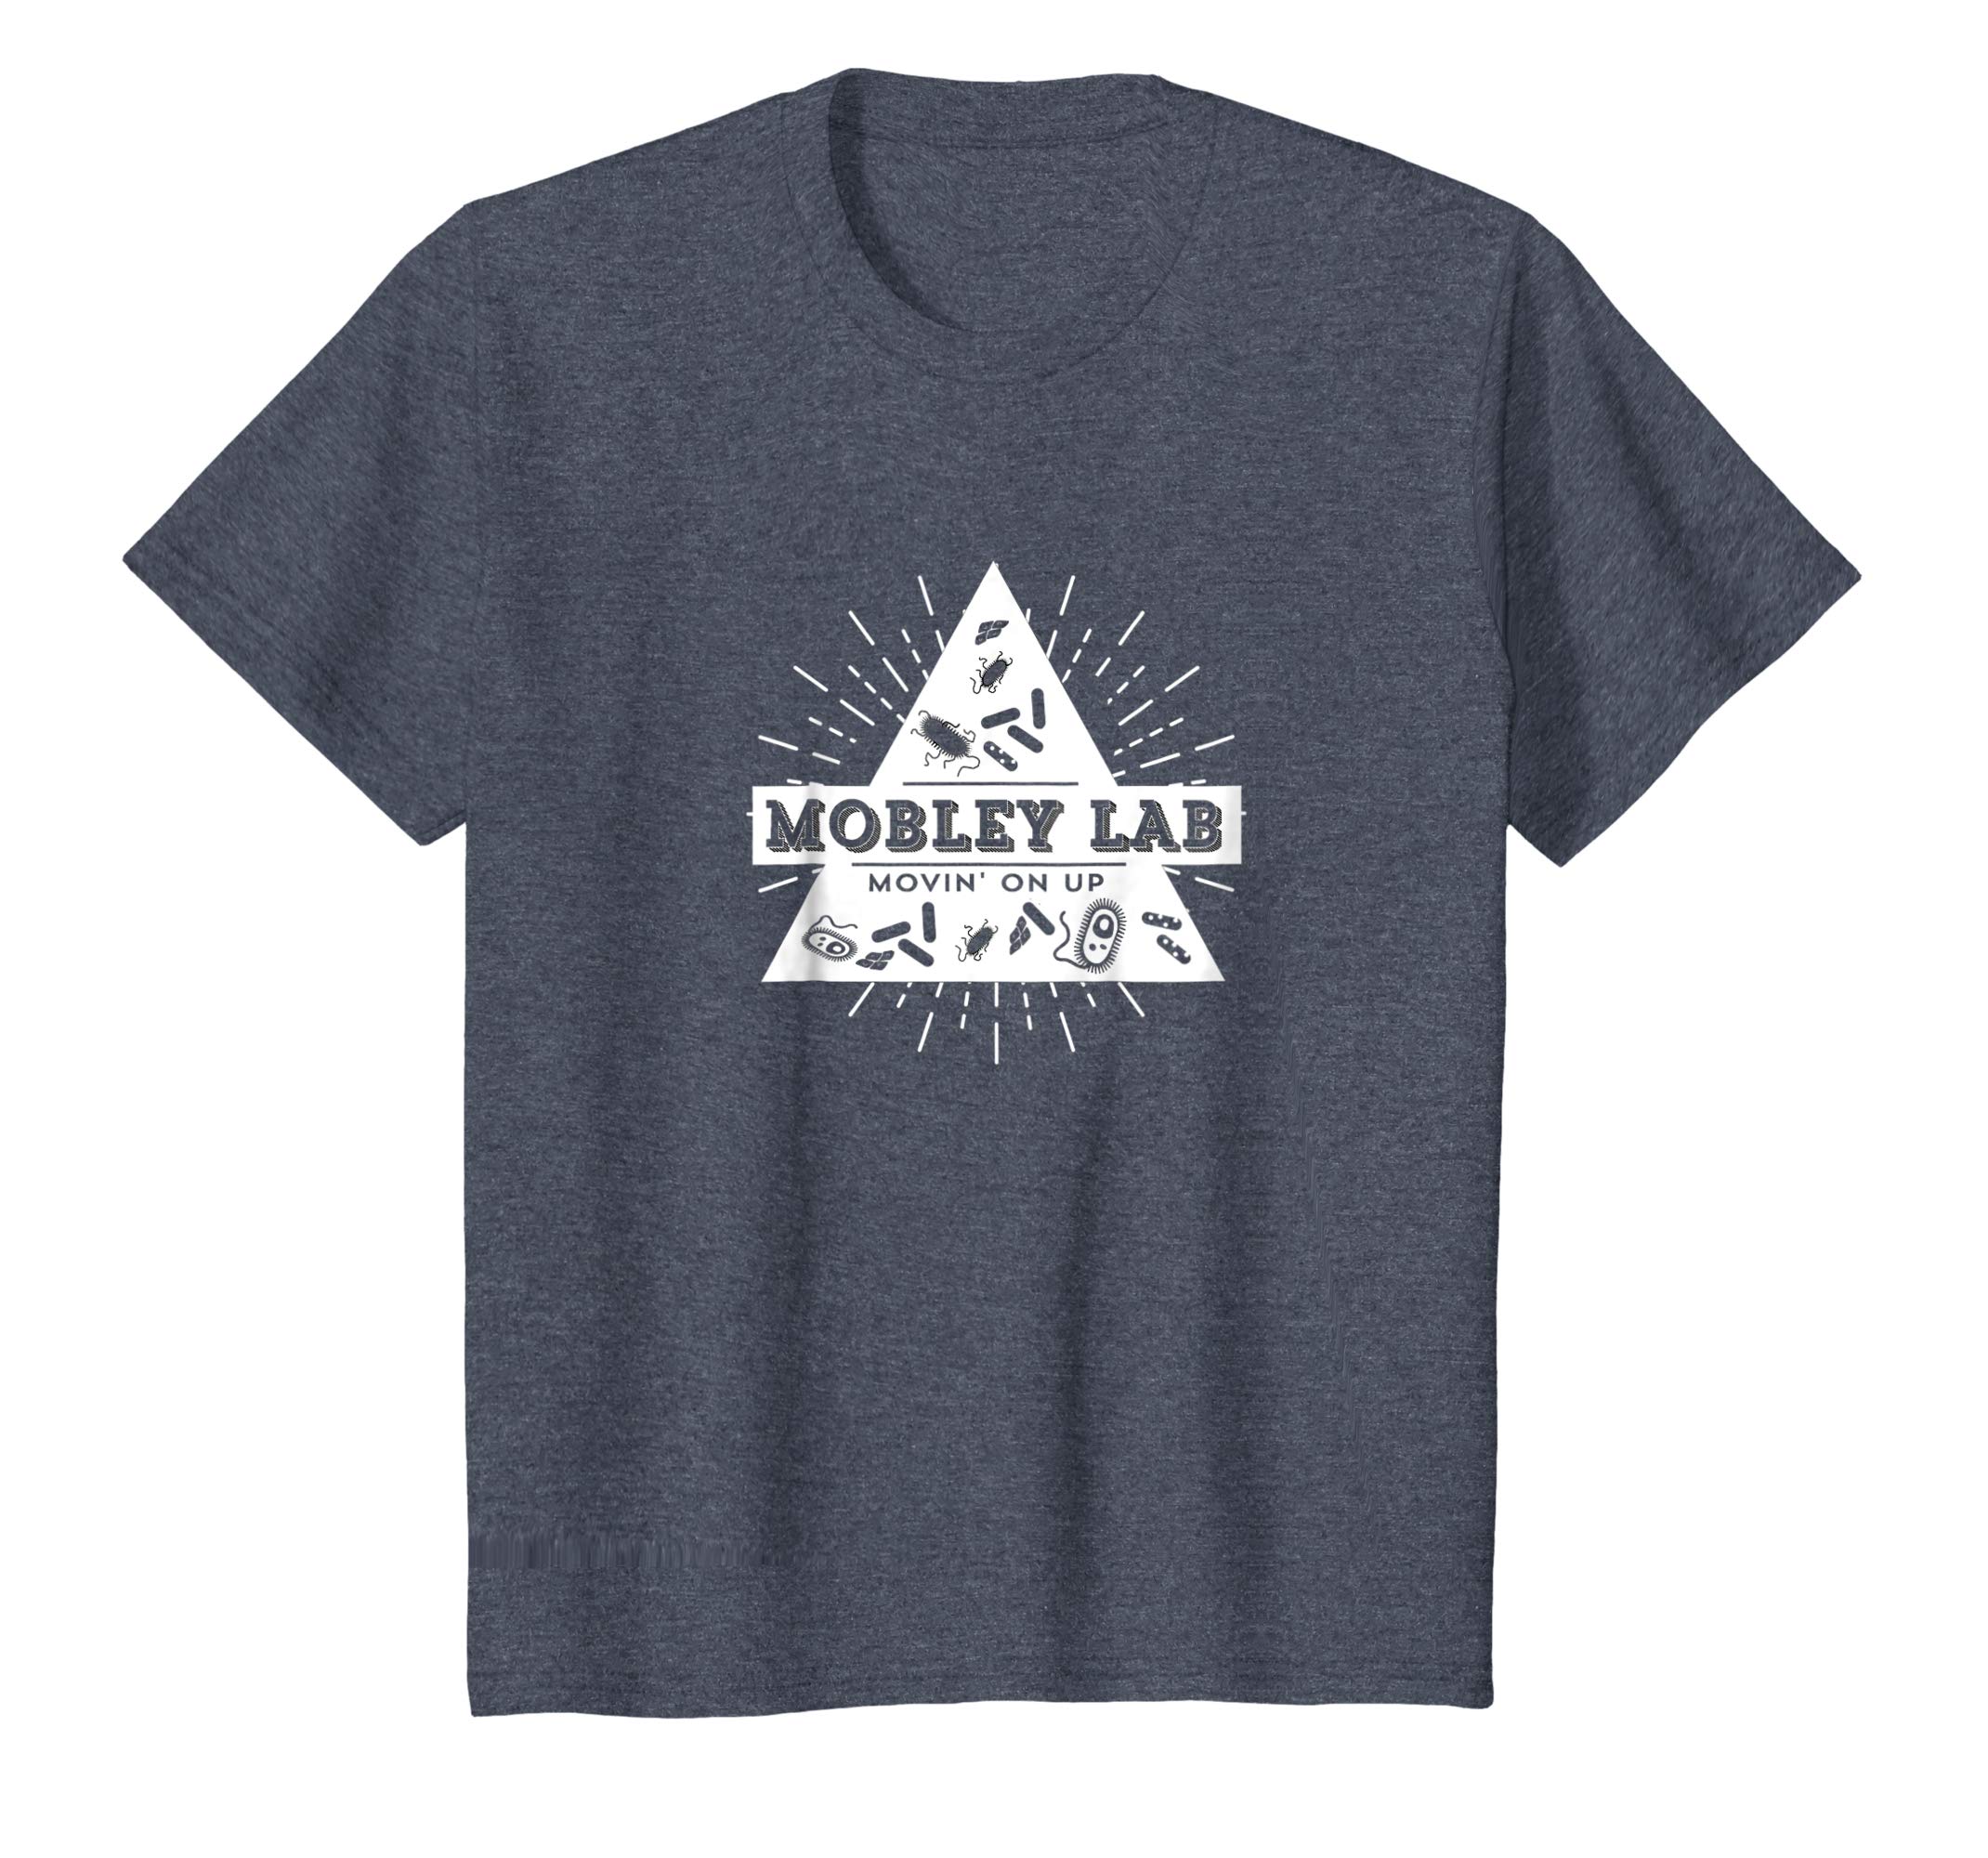 Mobley Logo - Amazon.com: Mobley Lab - Triangle Logo in White: Clothing